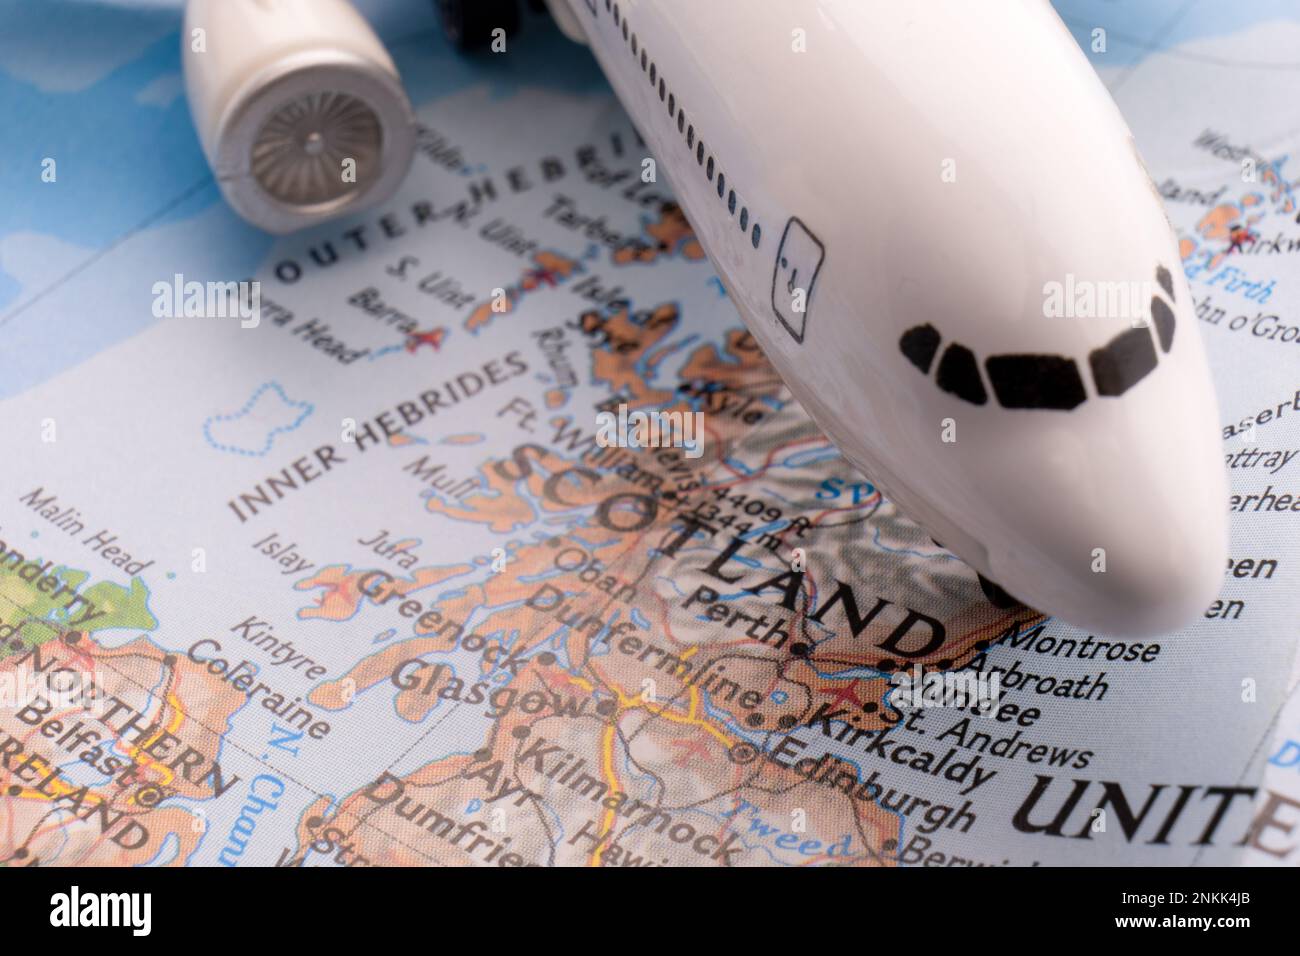 Close up of a miniature passenger plane on a colorful map showing Edinburgh, Dundee Scotland through selective focus, background blur Stock Photo